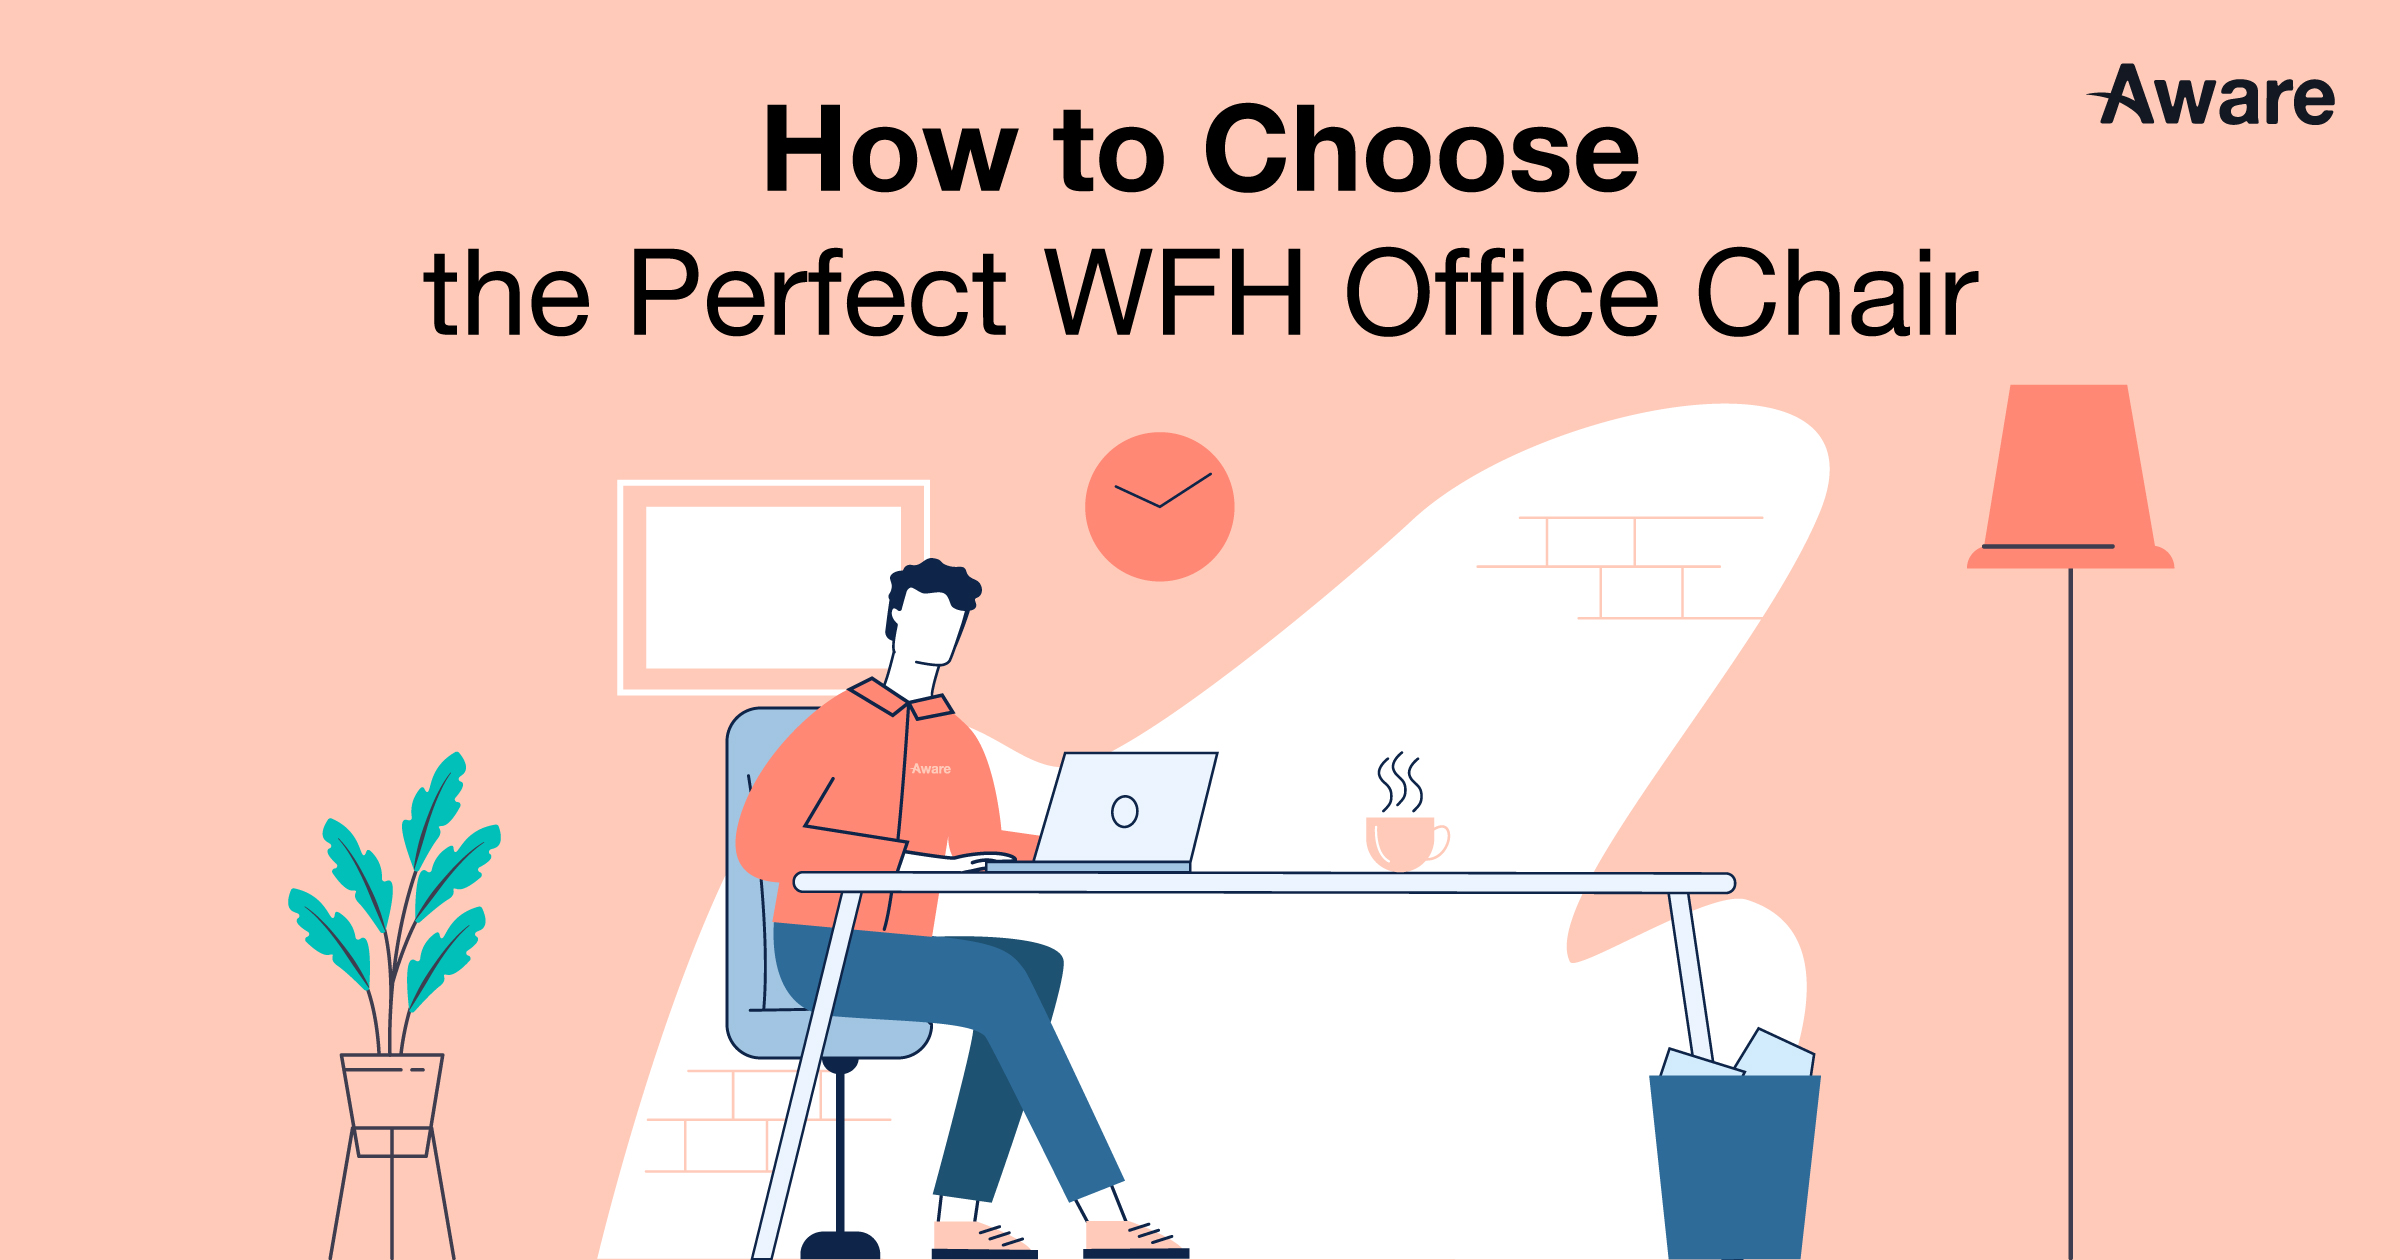 Design your Perfect WFH Environment